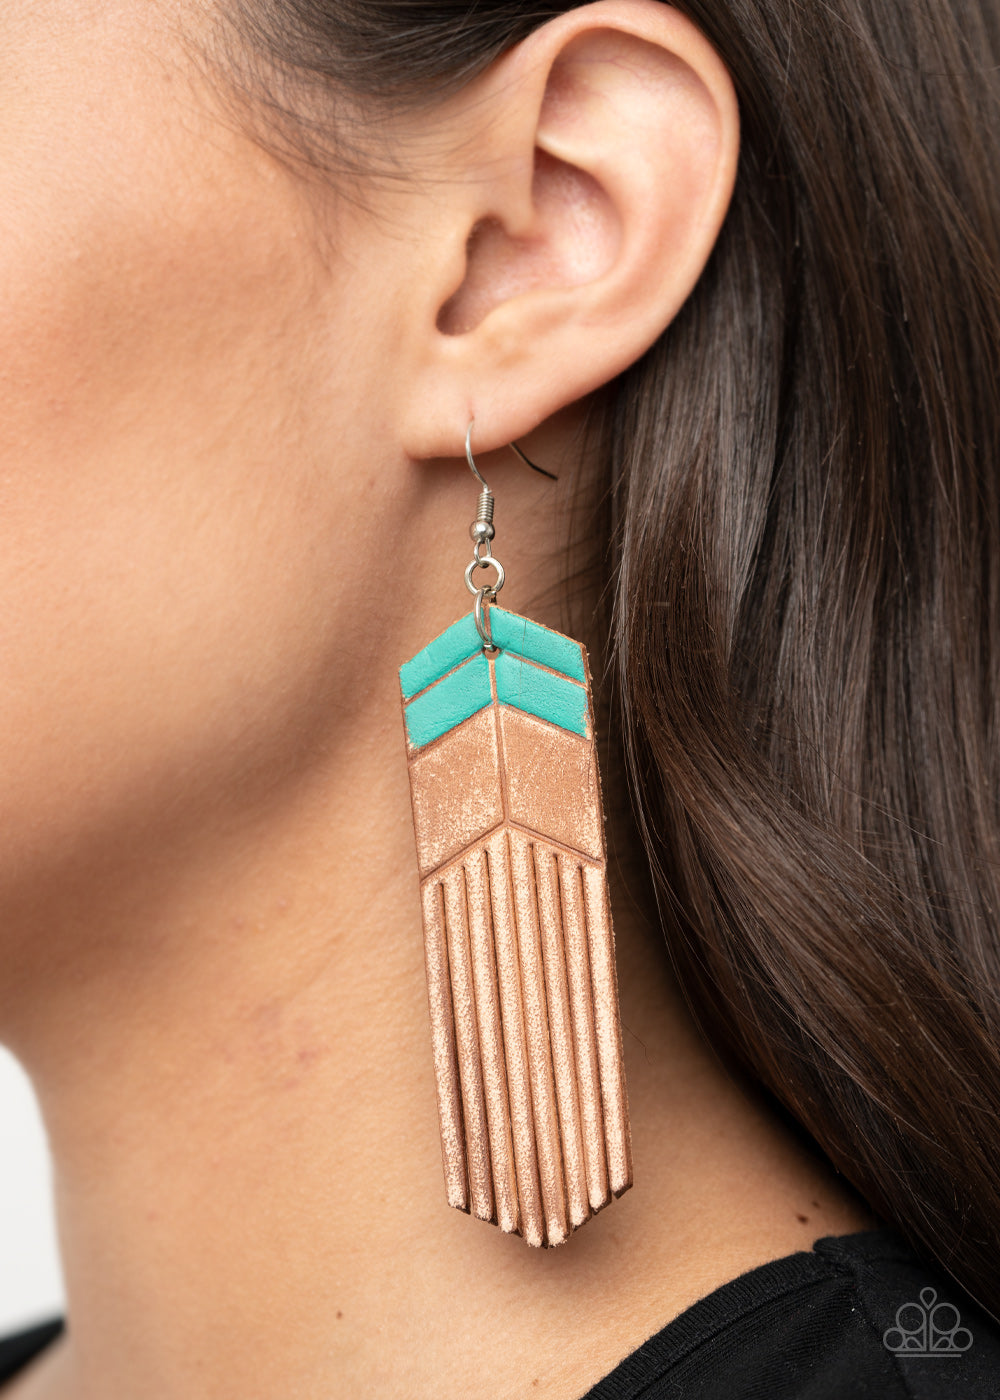 Paparazzi Jewelry & Accessories - Desert Trails - Blue Earrings. Bling By Titia Boutique